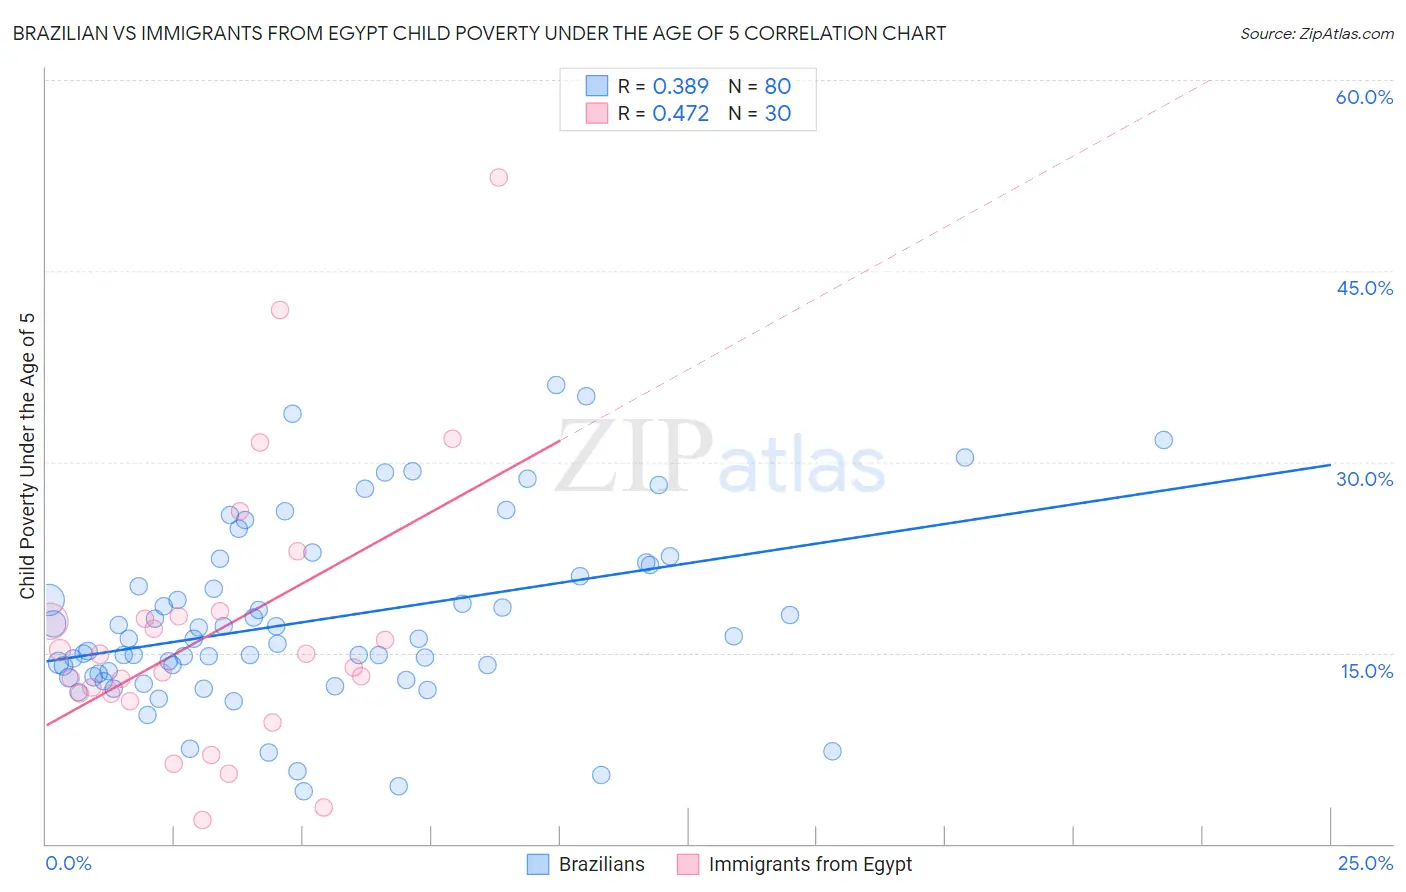 Brazilian vs Immigrants from Egypt Child Poverty Under the Age of 5